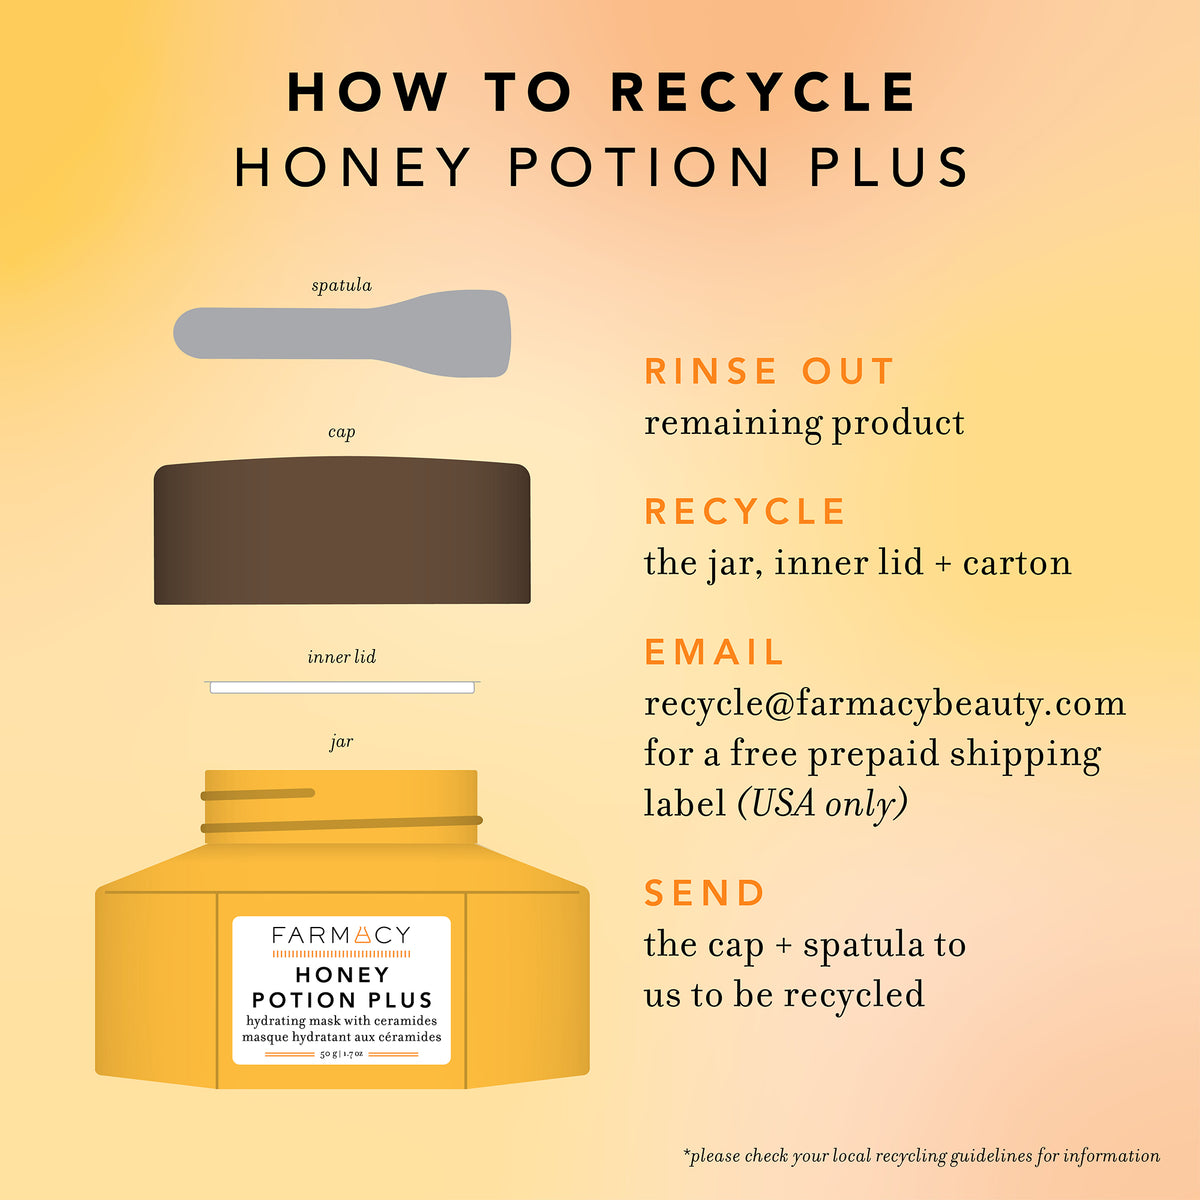 How to recycle Honey Potion Plus